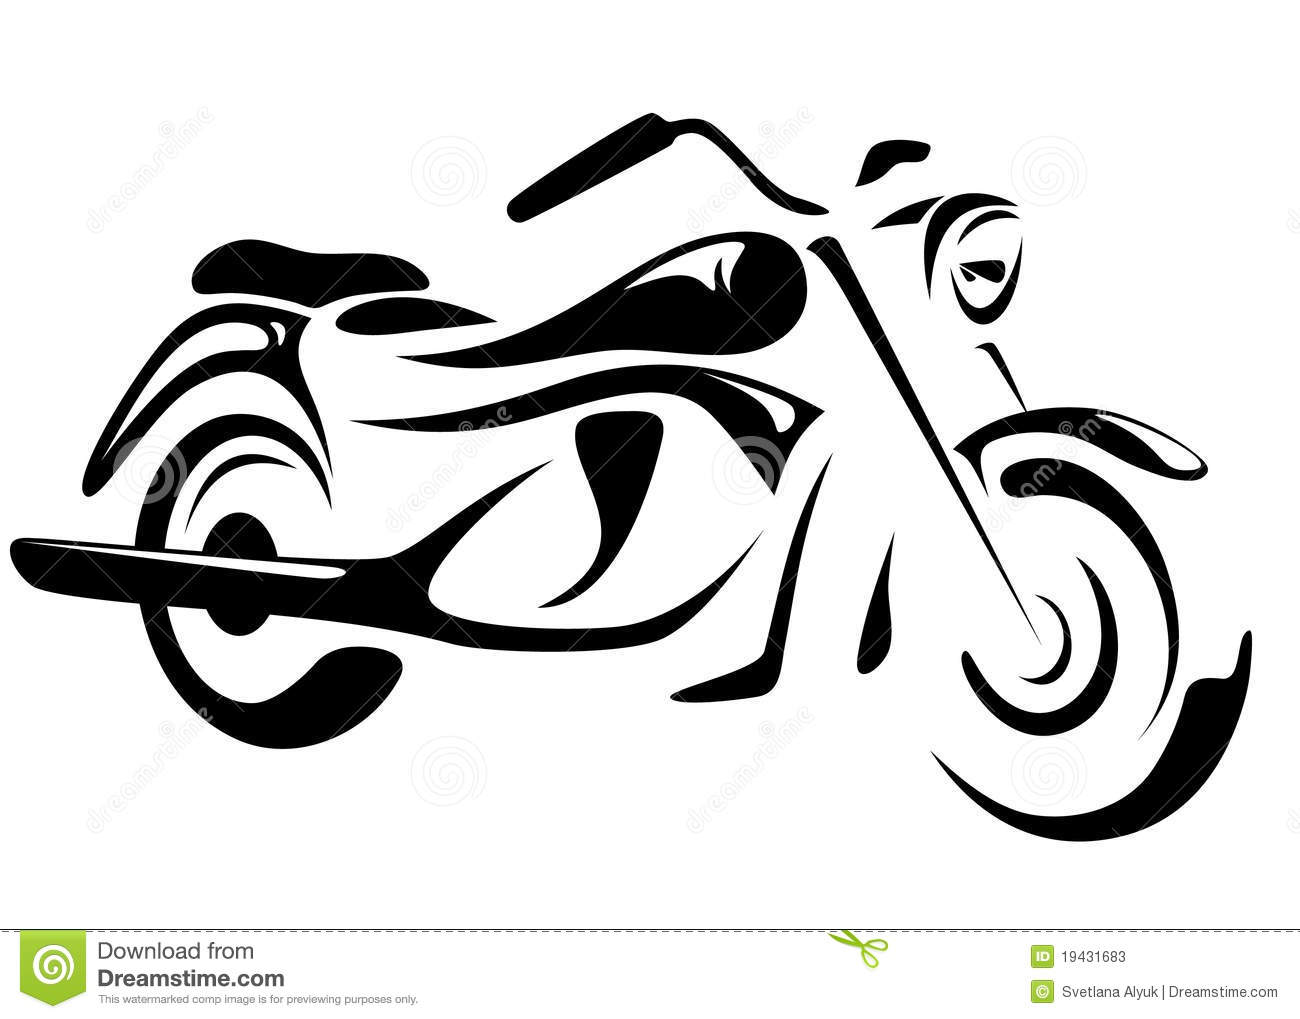 101 motorcycle silhouette.